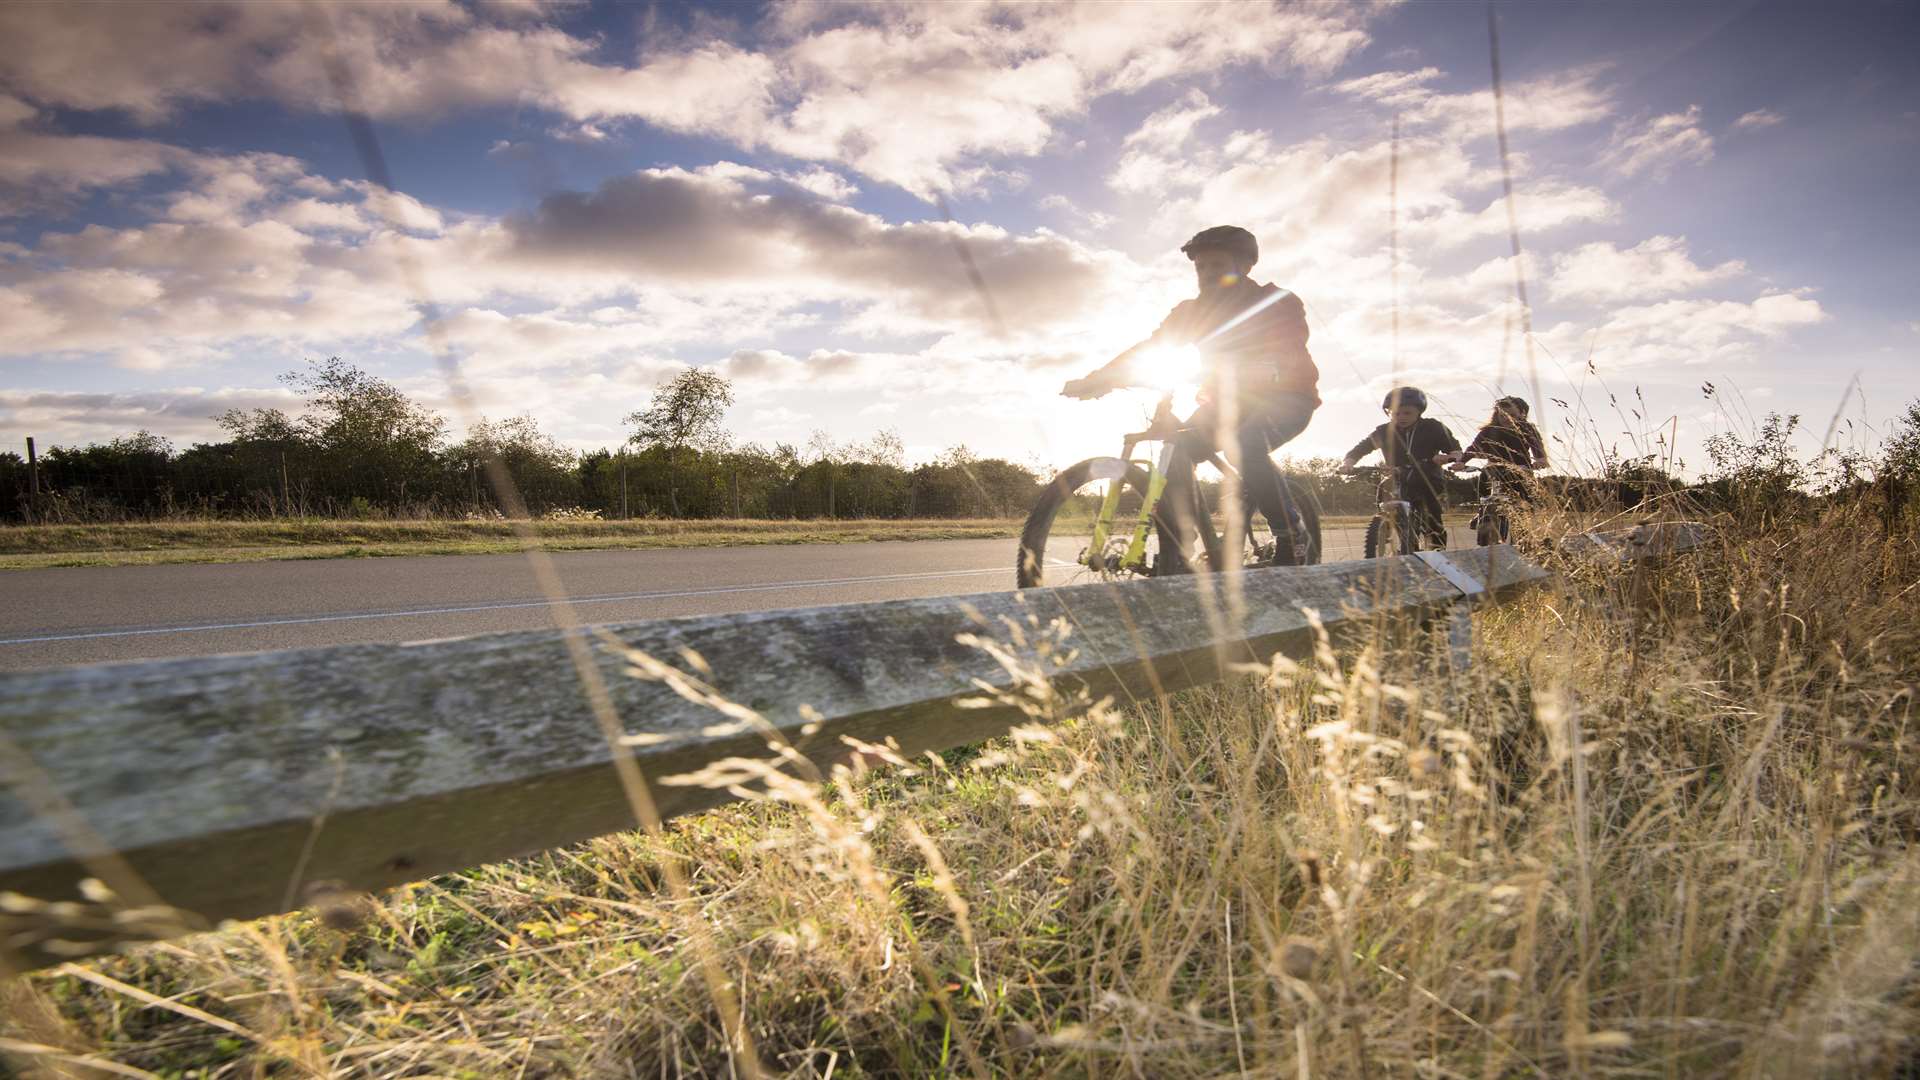 Hire a bike and head out on the open road with the family across Kent